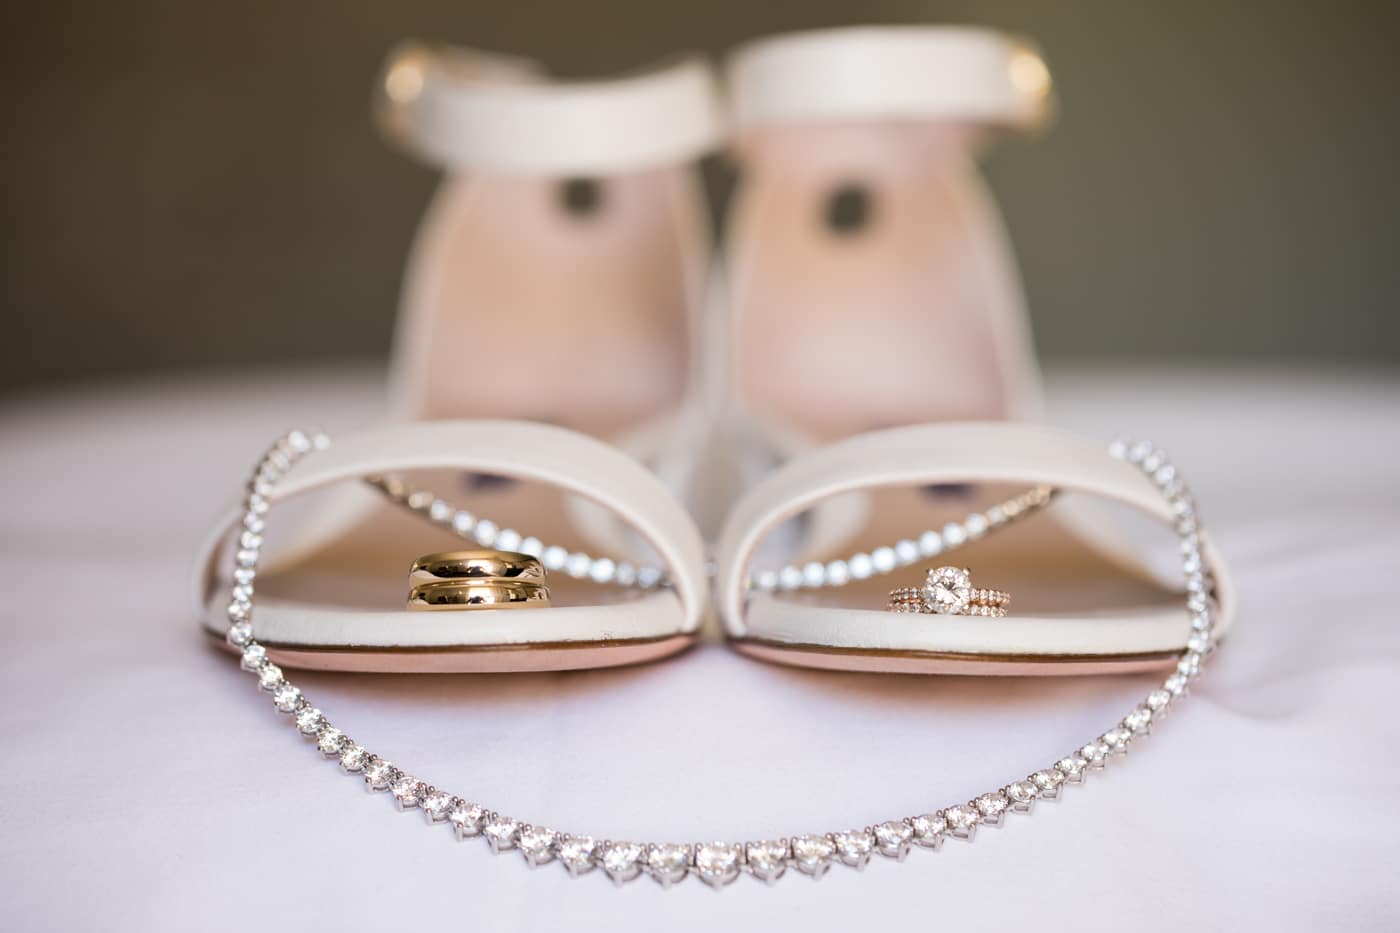 Detail shot of wedding rings, shoes, and jewelry